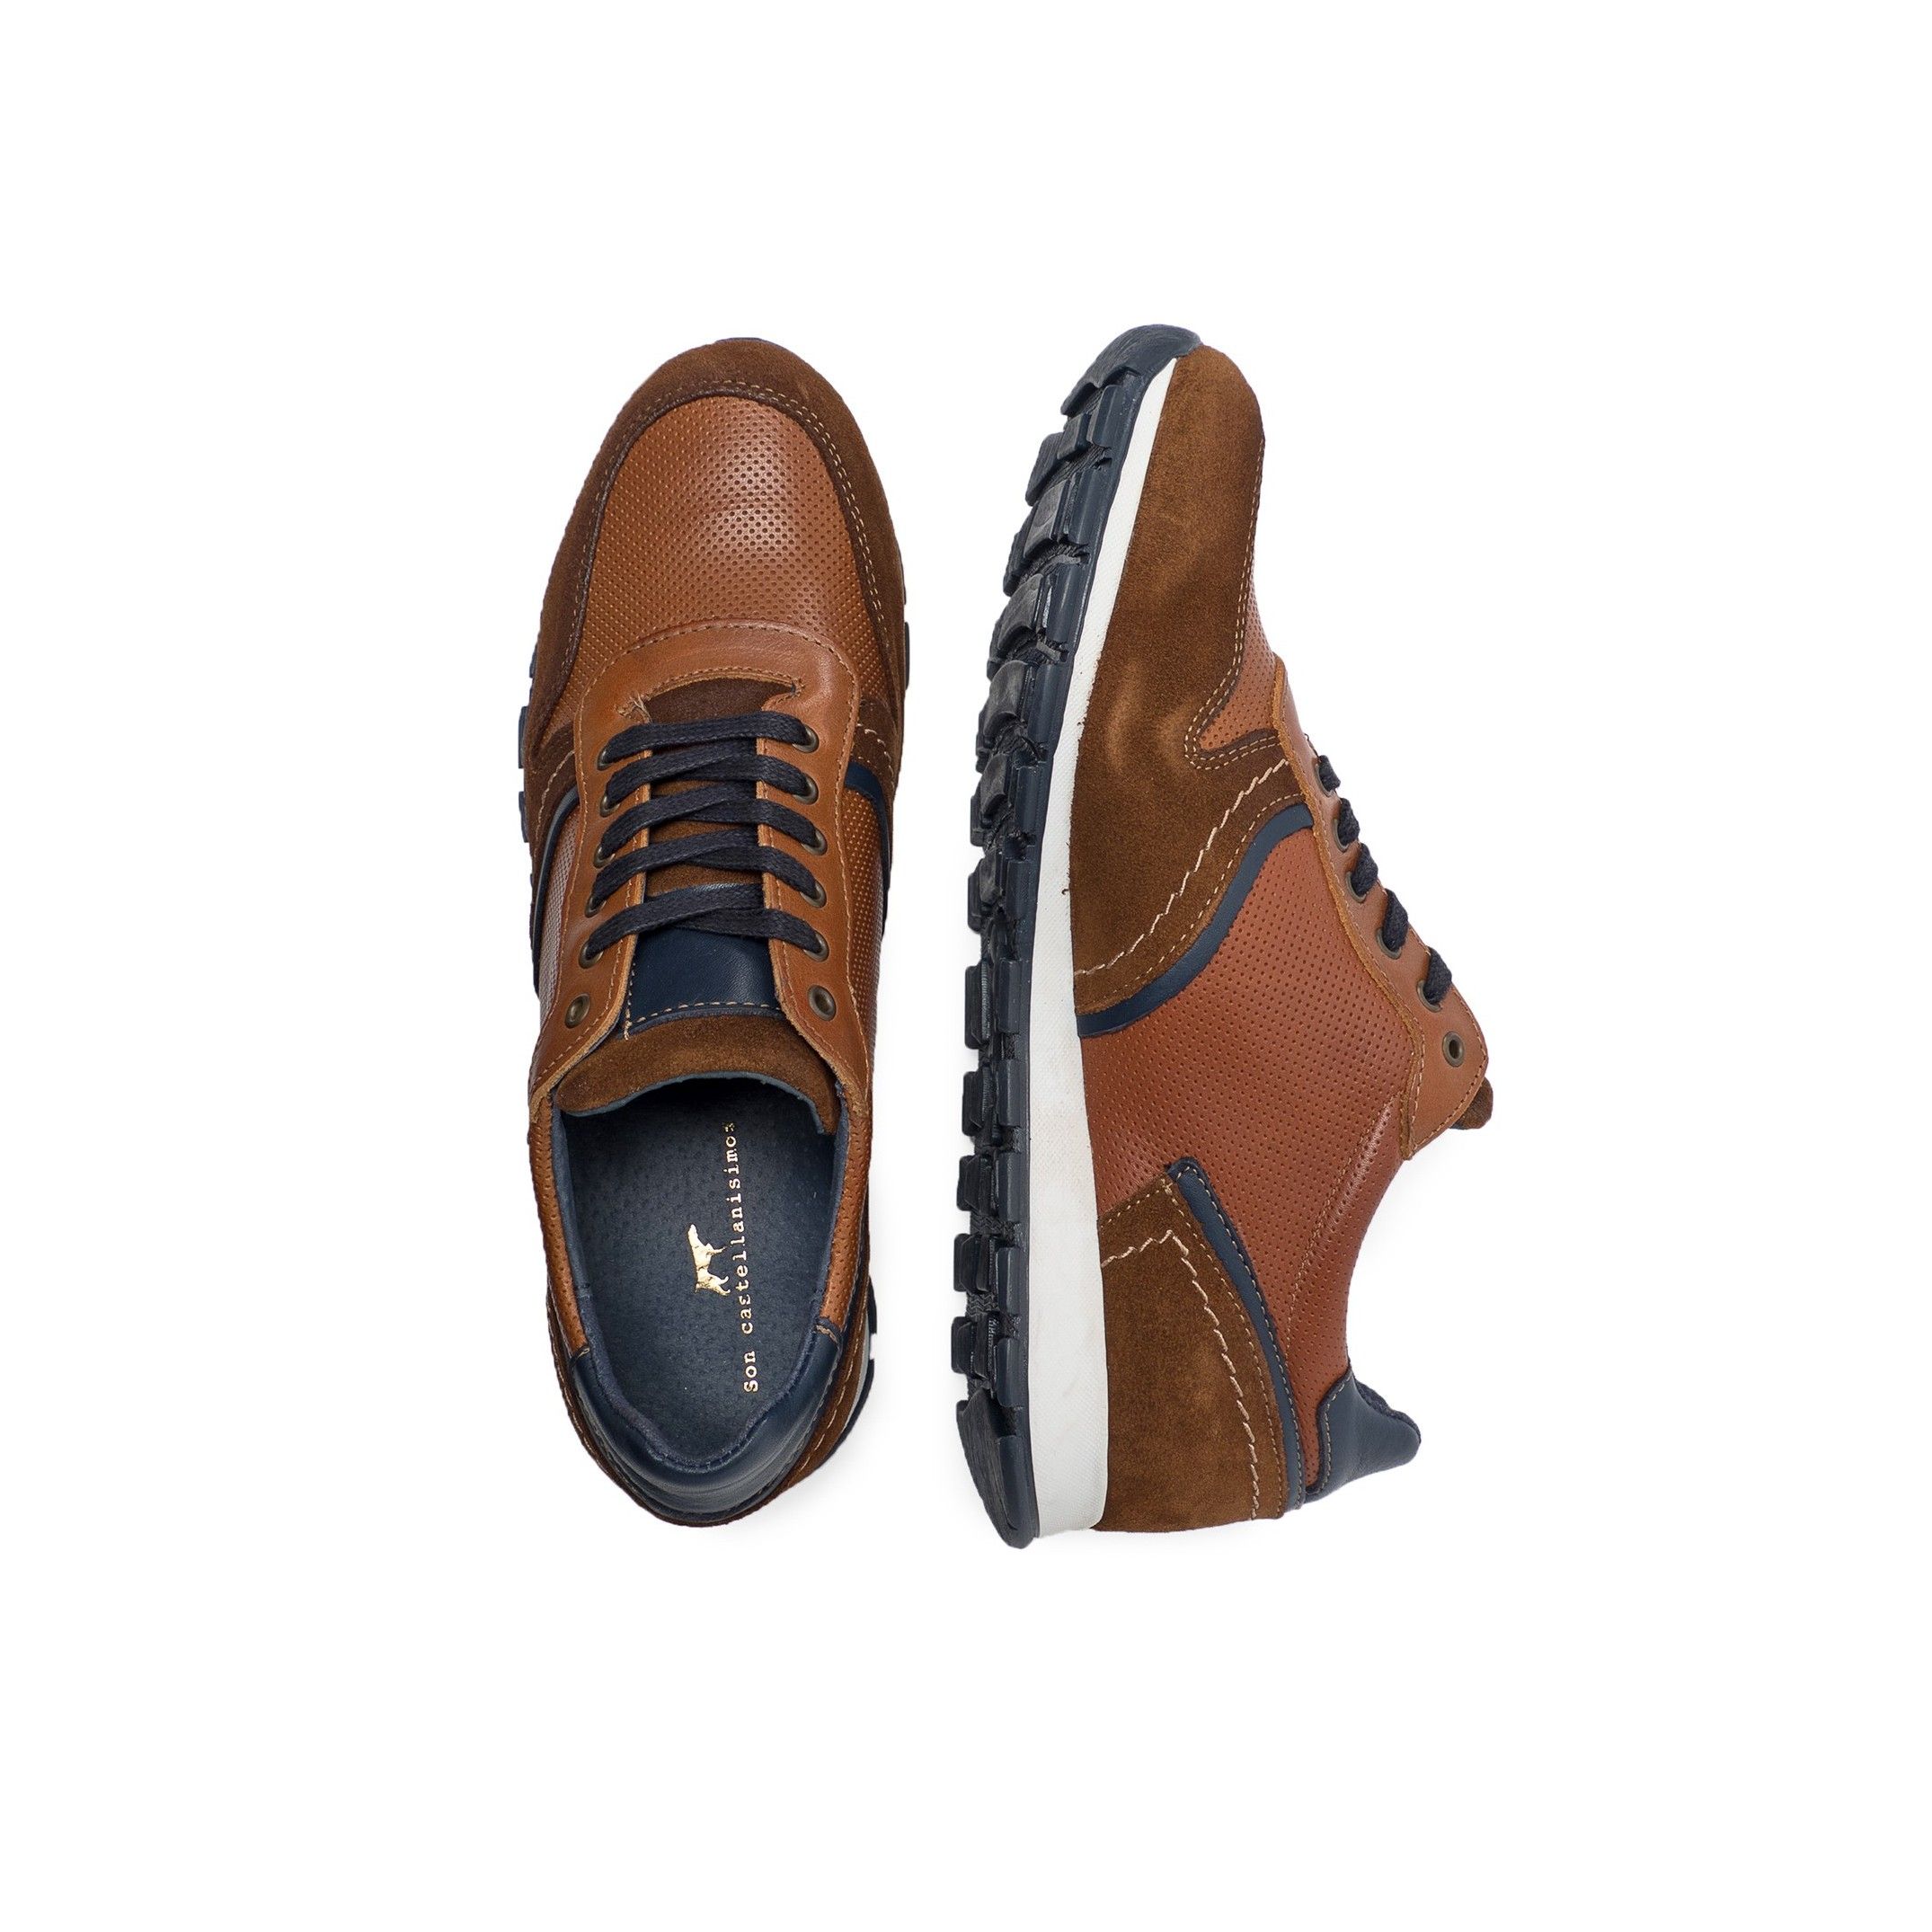 Sneakers with laces for men by Son Castellanisimos. Upper made of cowhide leather. Cotton laces closure. Inner lining and insole made of cowhide leather. Sole material: synthetic and non slip. Heel height: 2 cm. Designed and made in Spain.